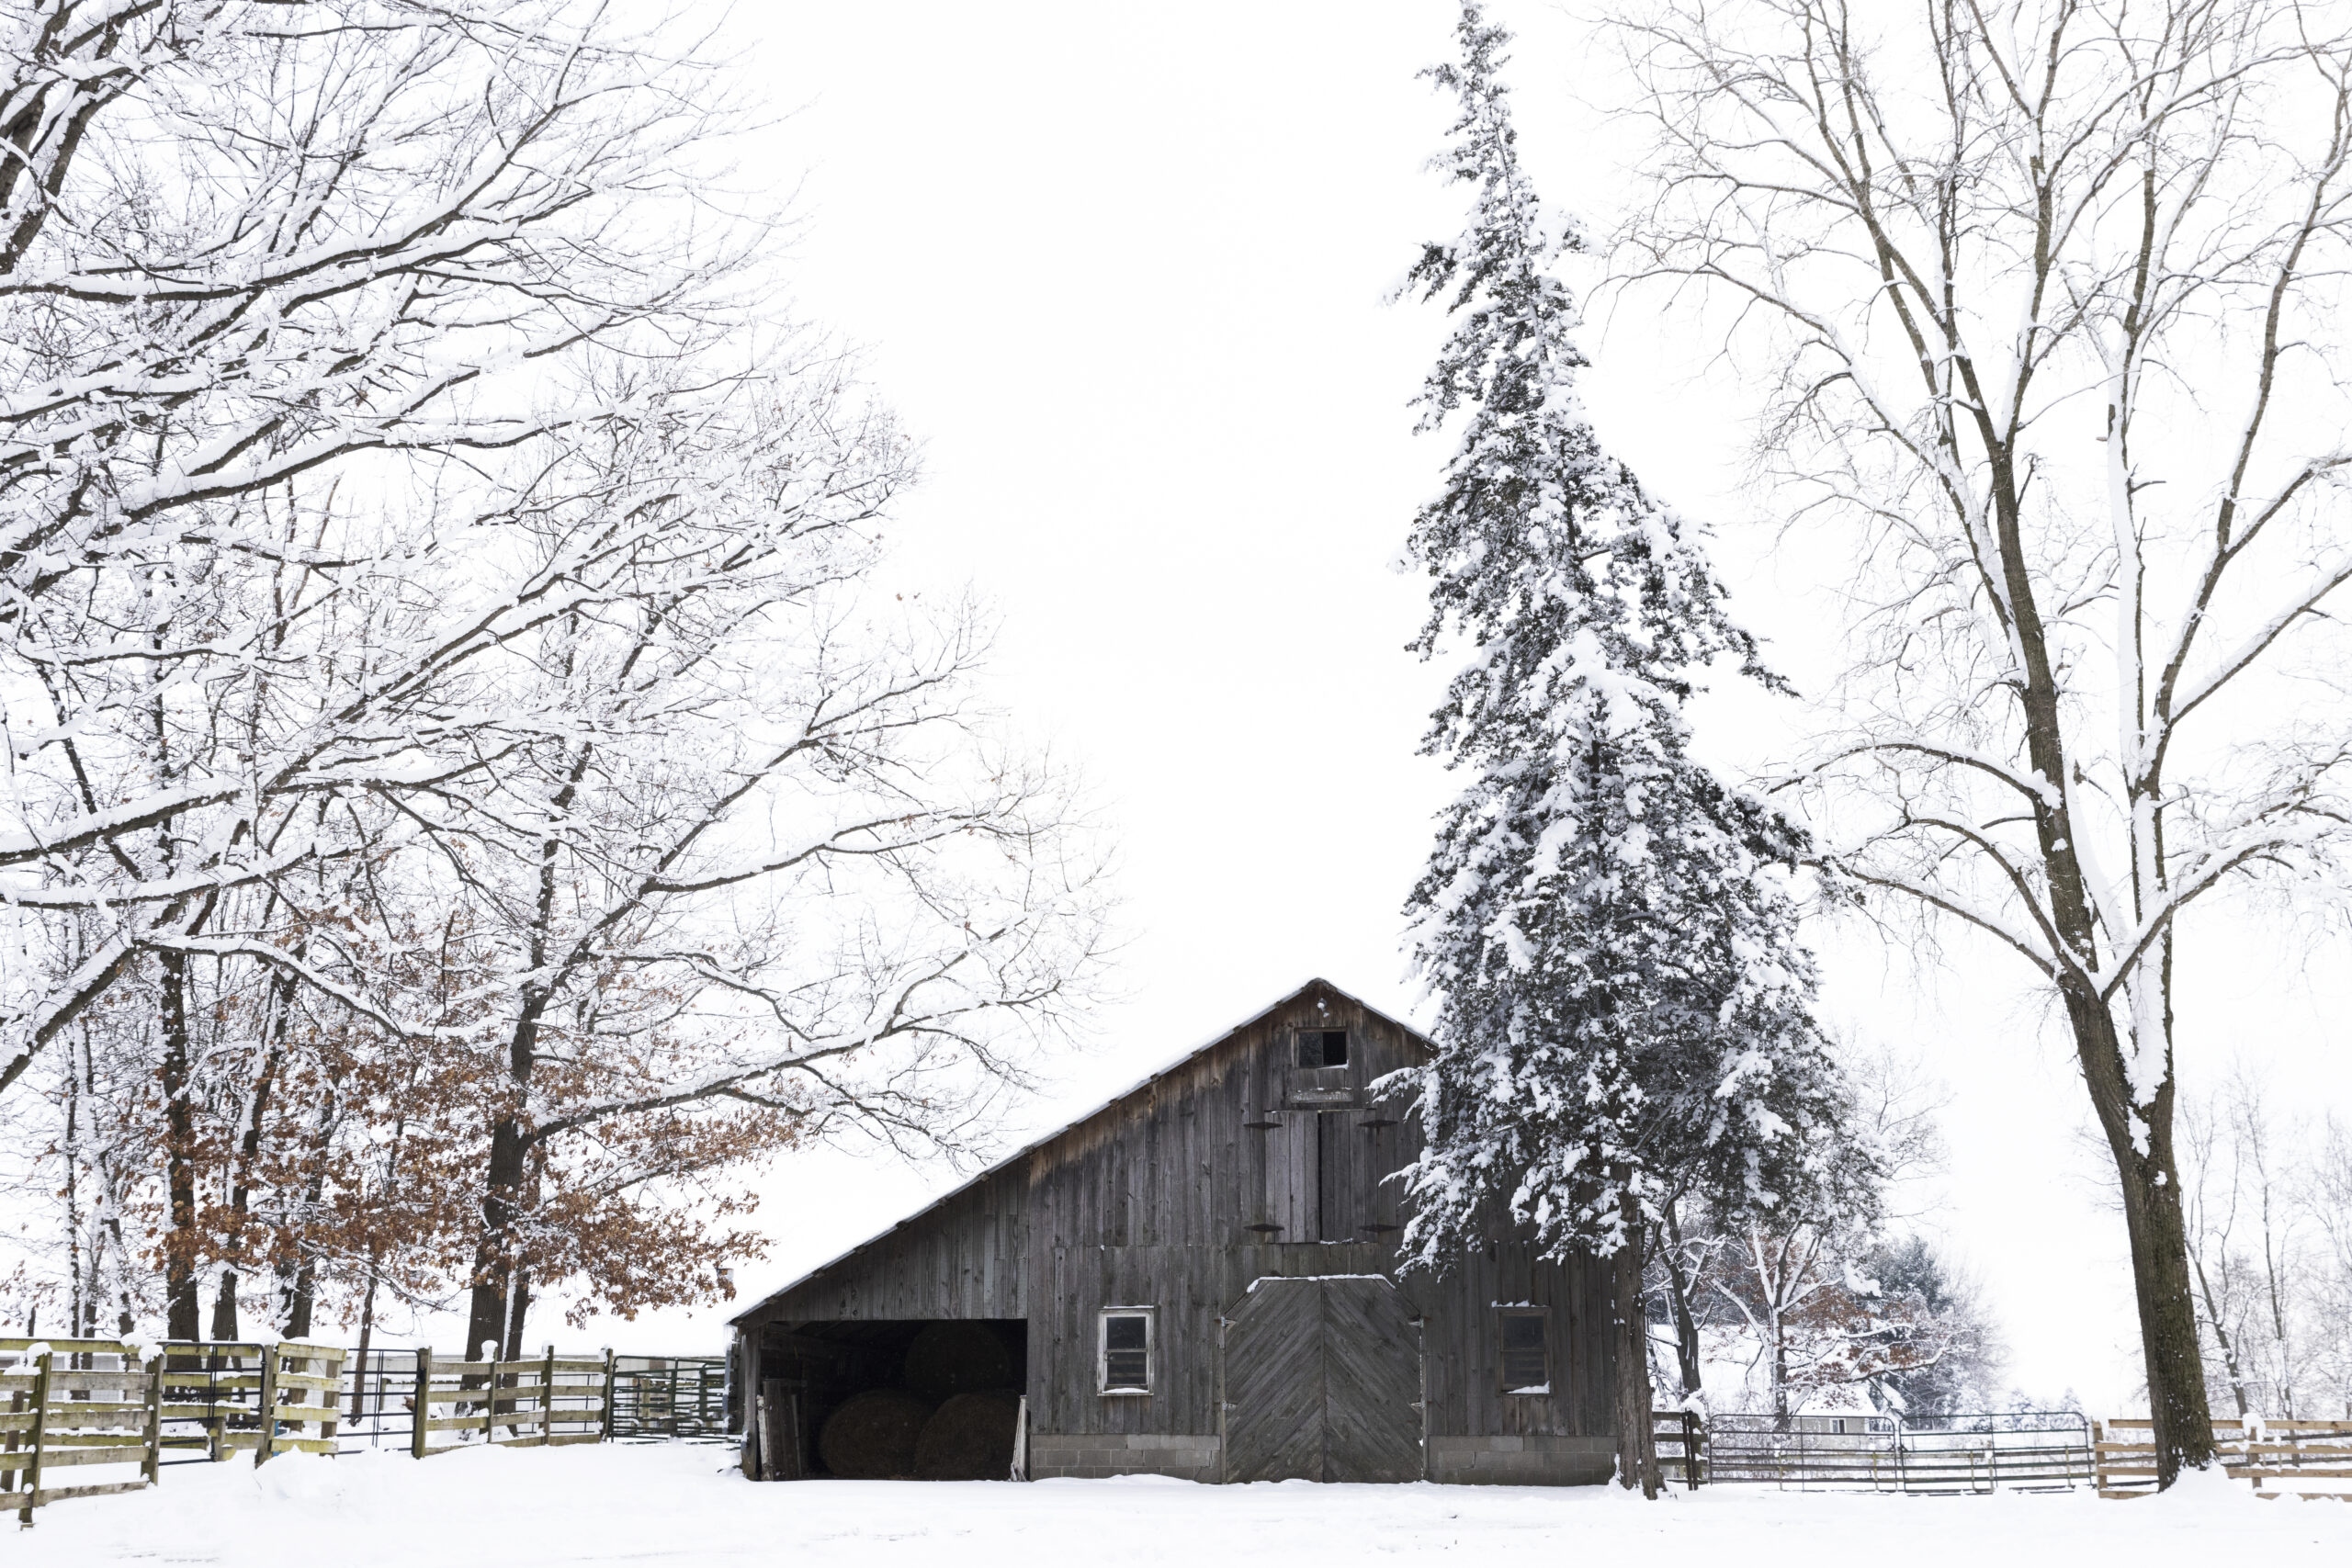 6 Things to do During Winter in Amish Country